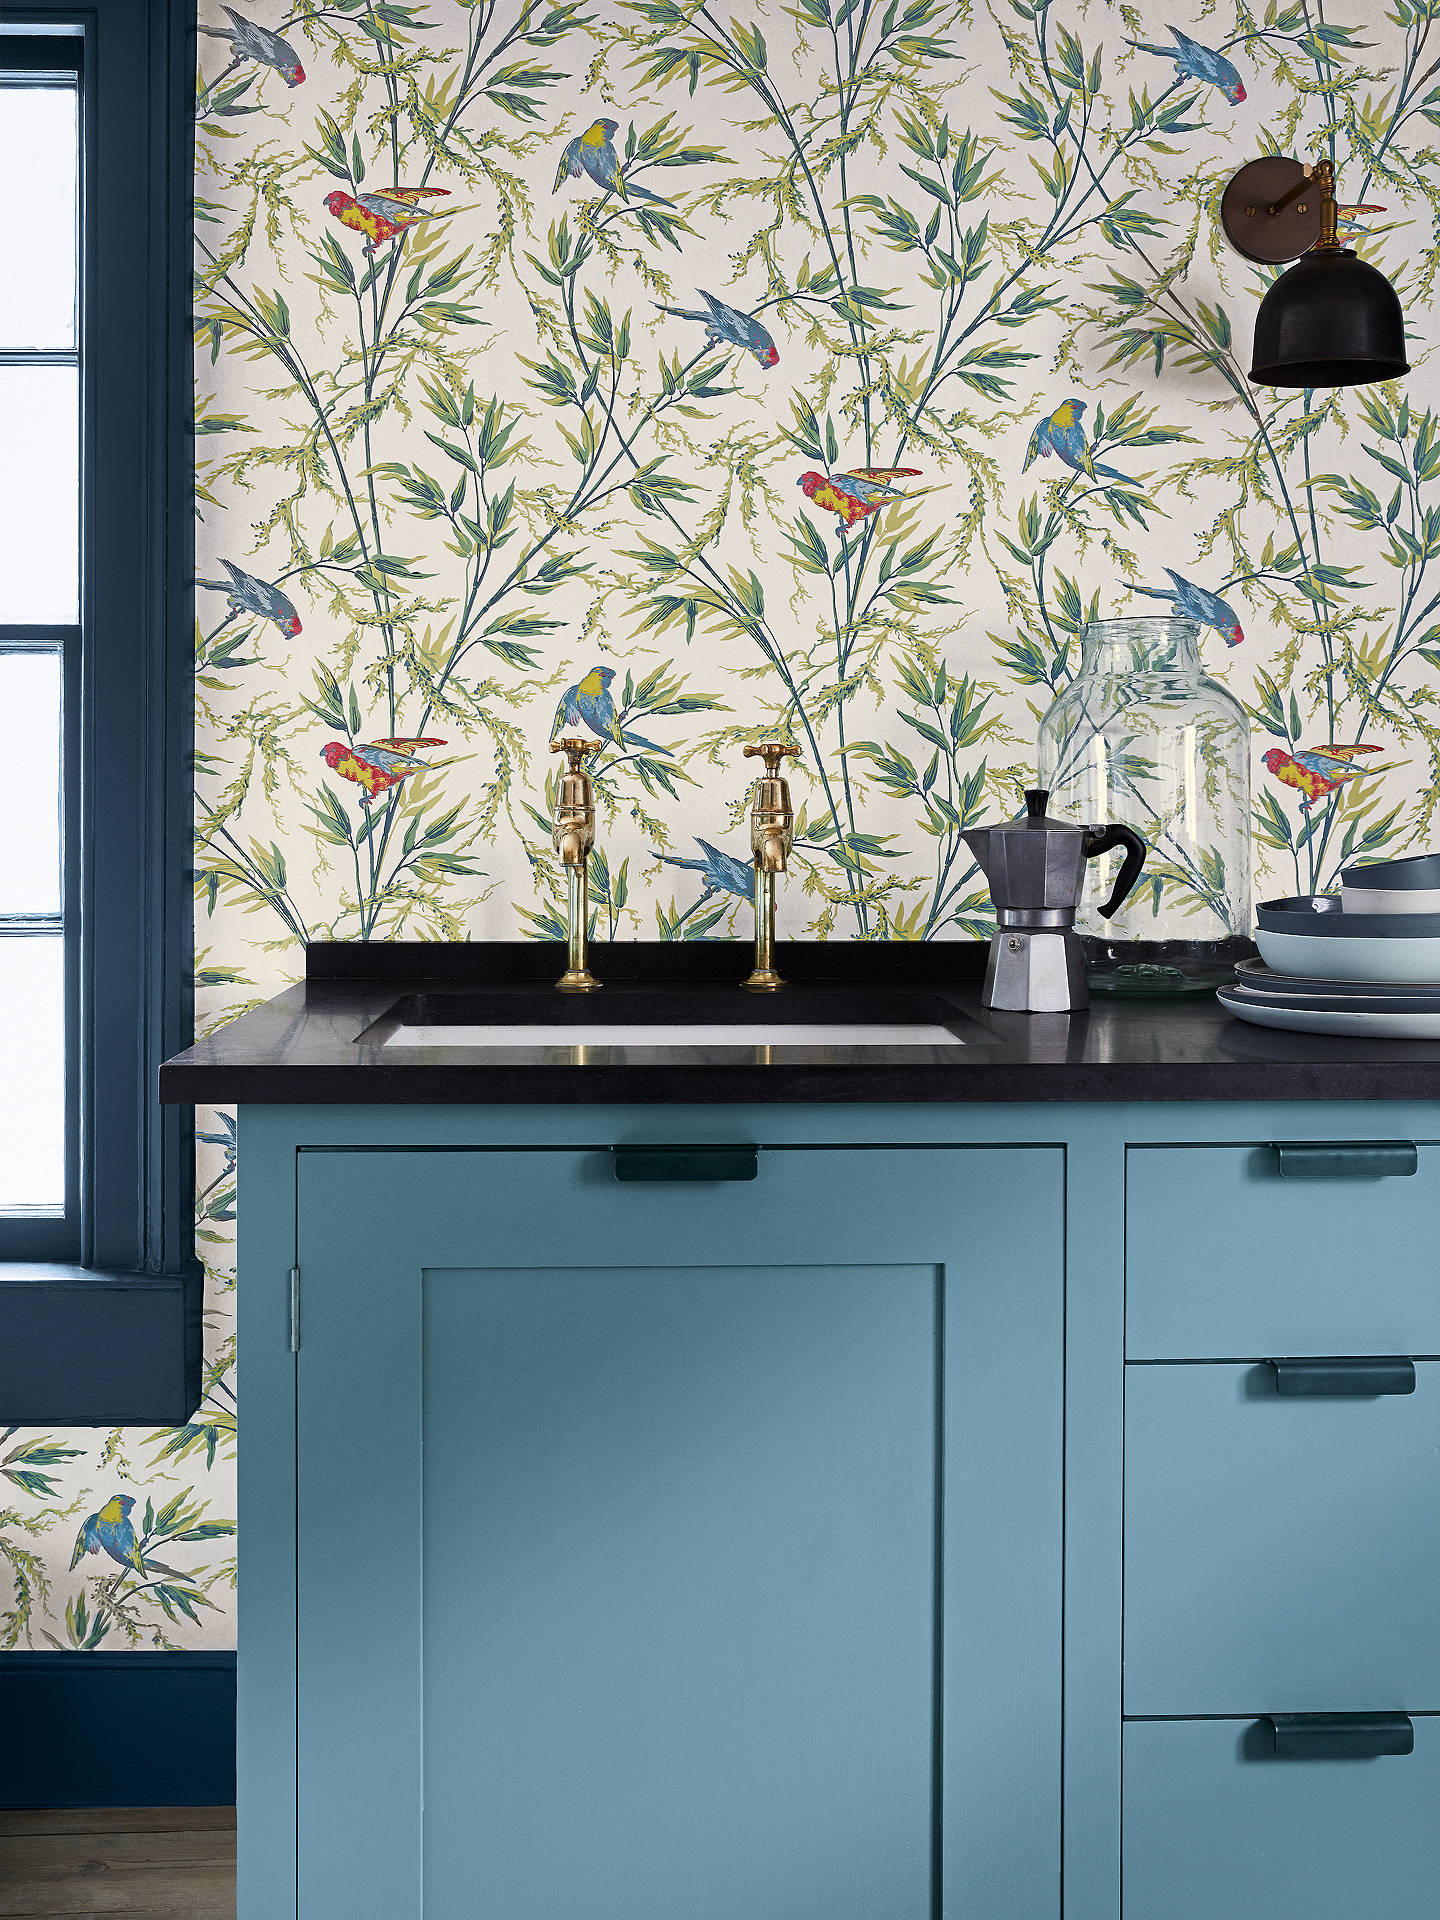 A Wallpaper Backsplash For Your Kitchen! - Driven by Decor